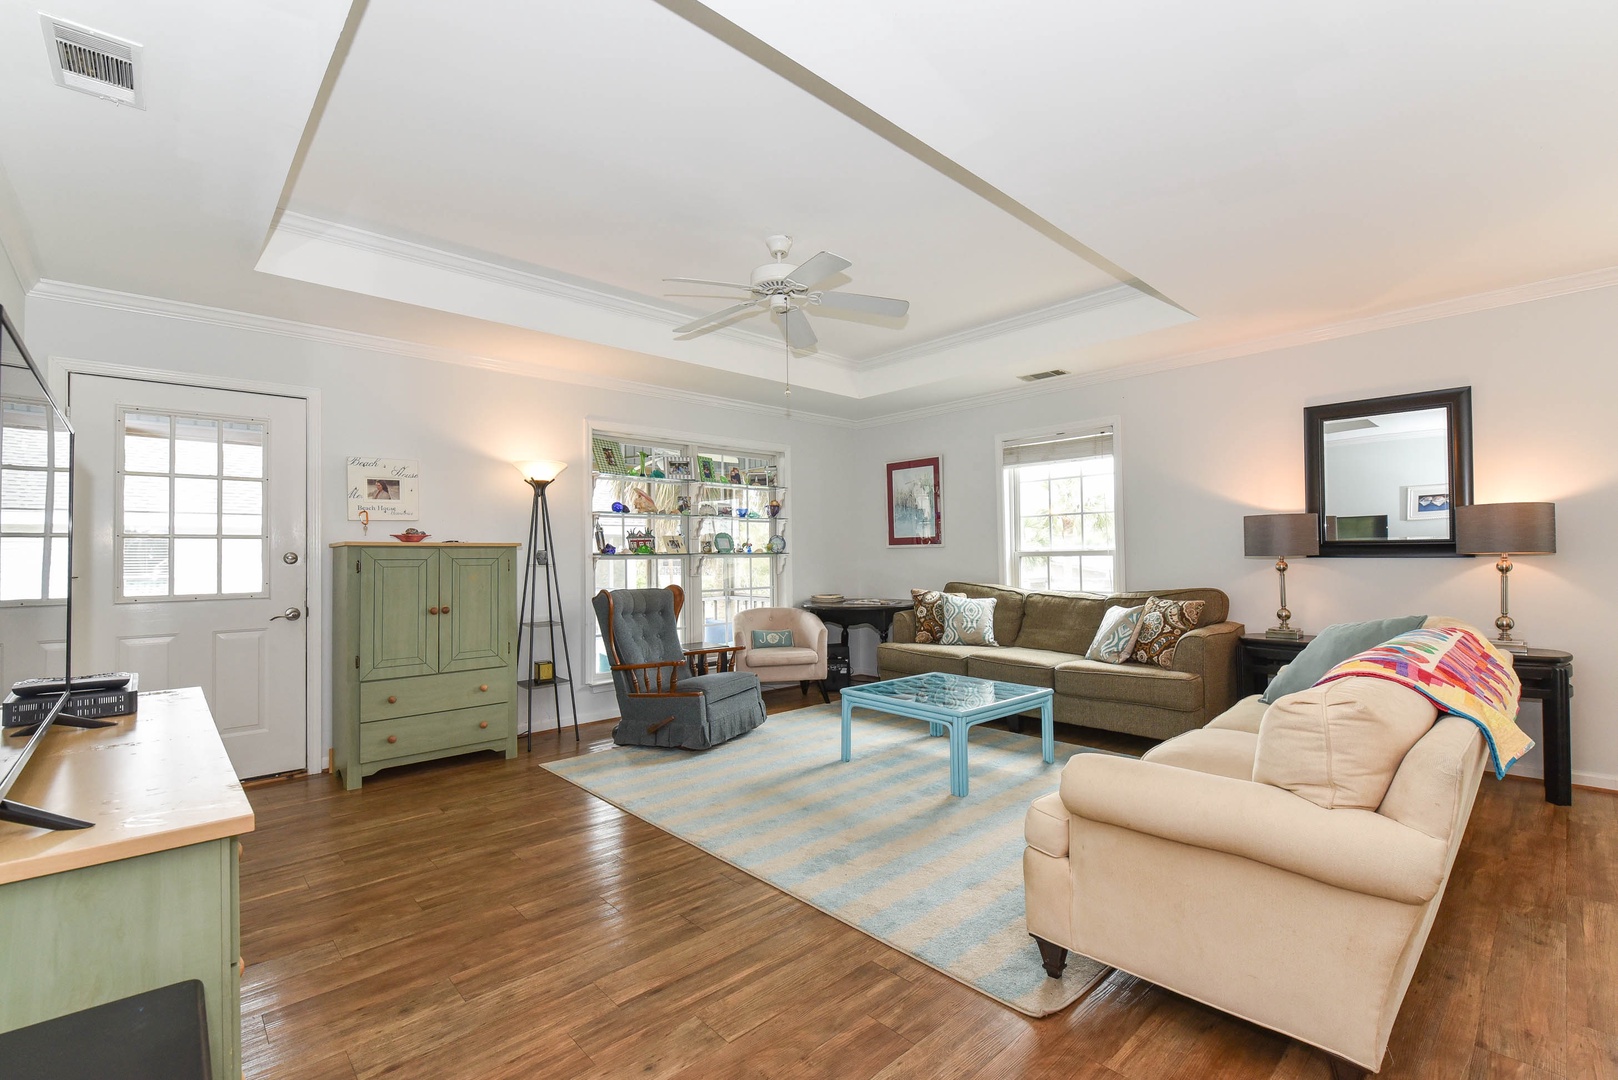 Tybee Paradise Beach House for Families, Pets